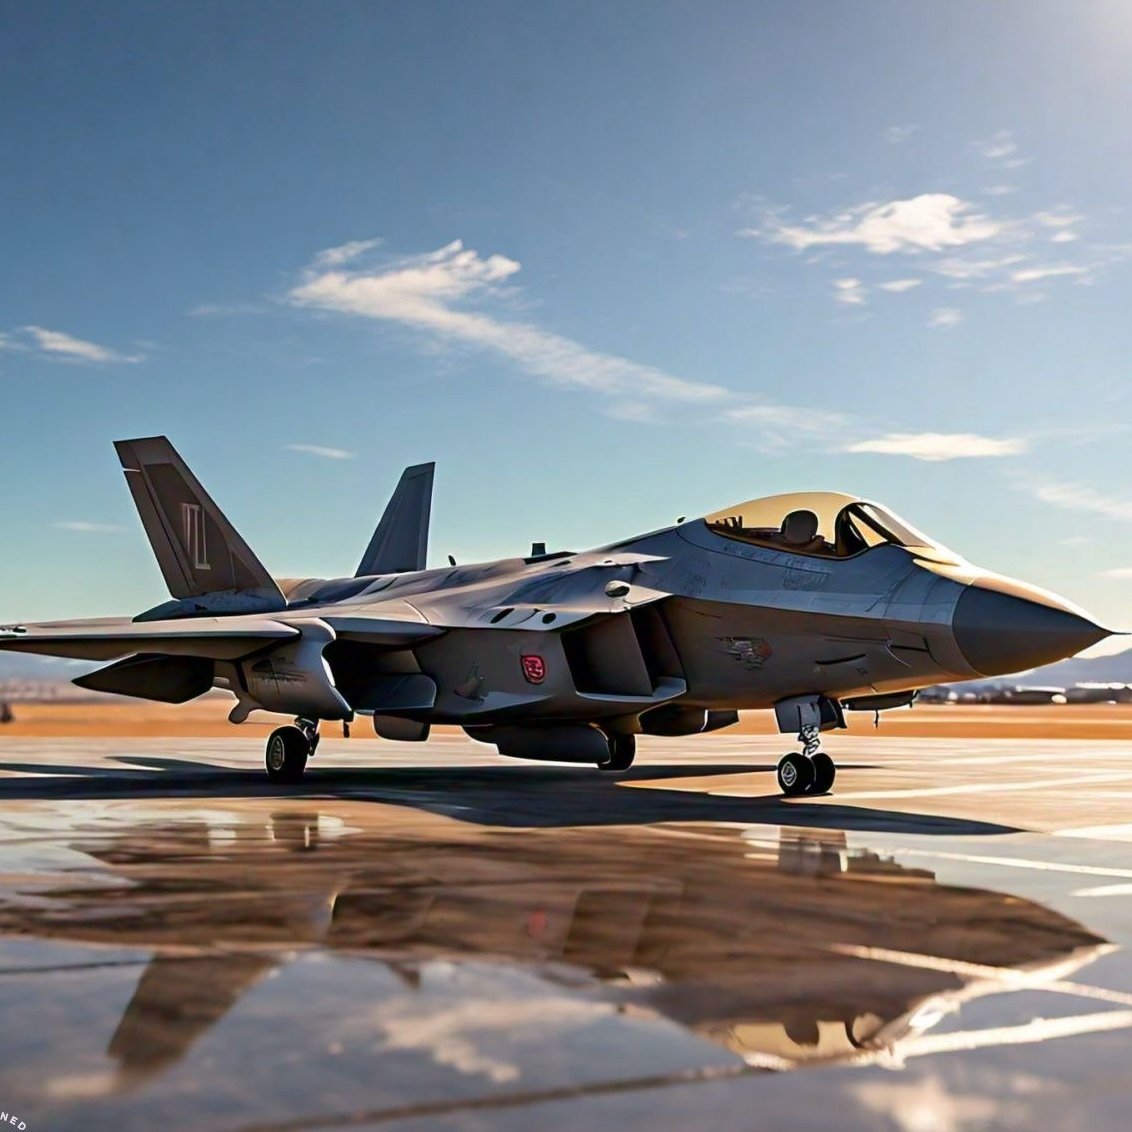 @Enezator The F-22 Raptor: a stealth fighter with advanced avionics, supercruise capability, and air dominance, making it a game-changer in modern airpower!